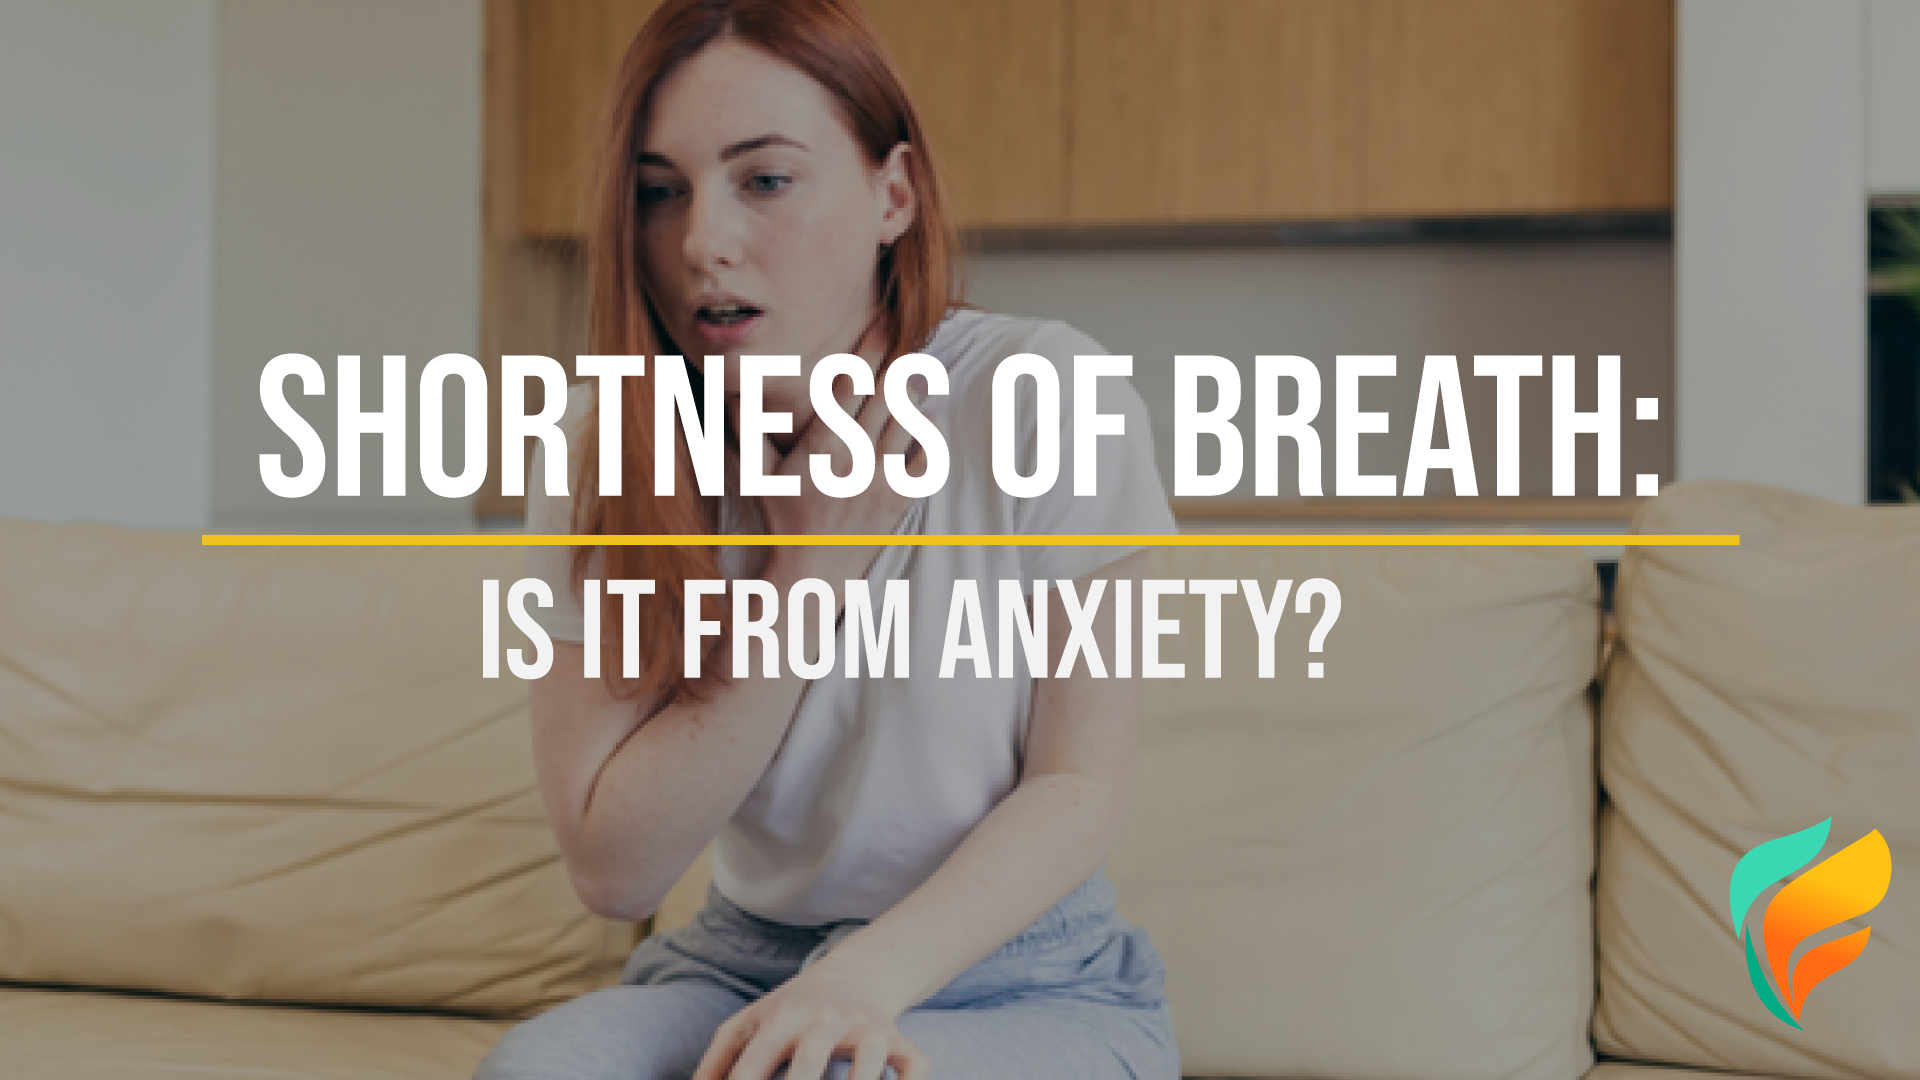 Does Anxiety Cause Shortness of Breath?